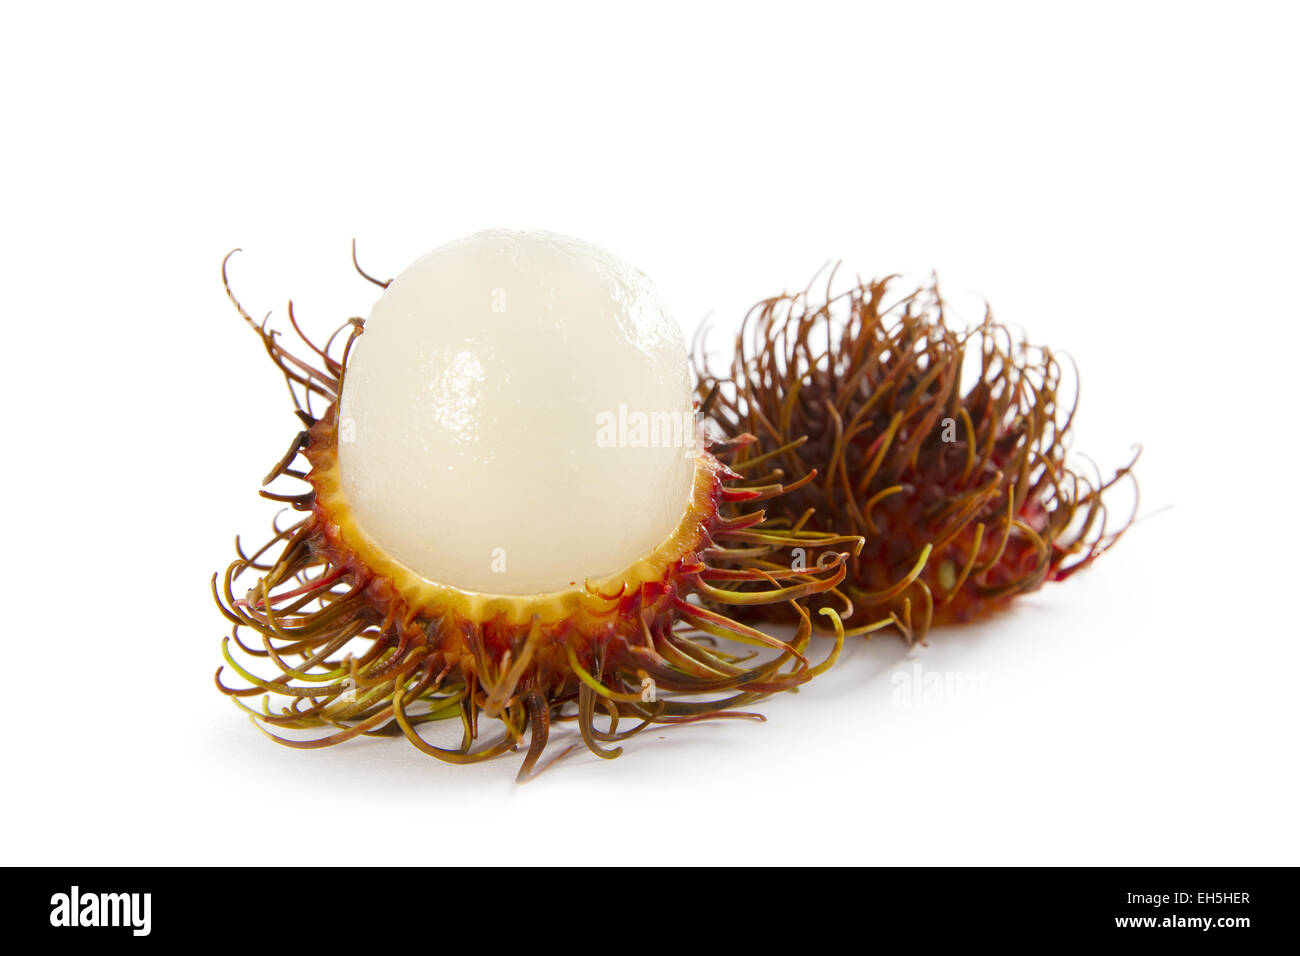 Inside view of an tropical rambutan fruit on white background. Stock Photo